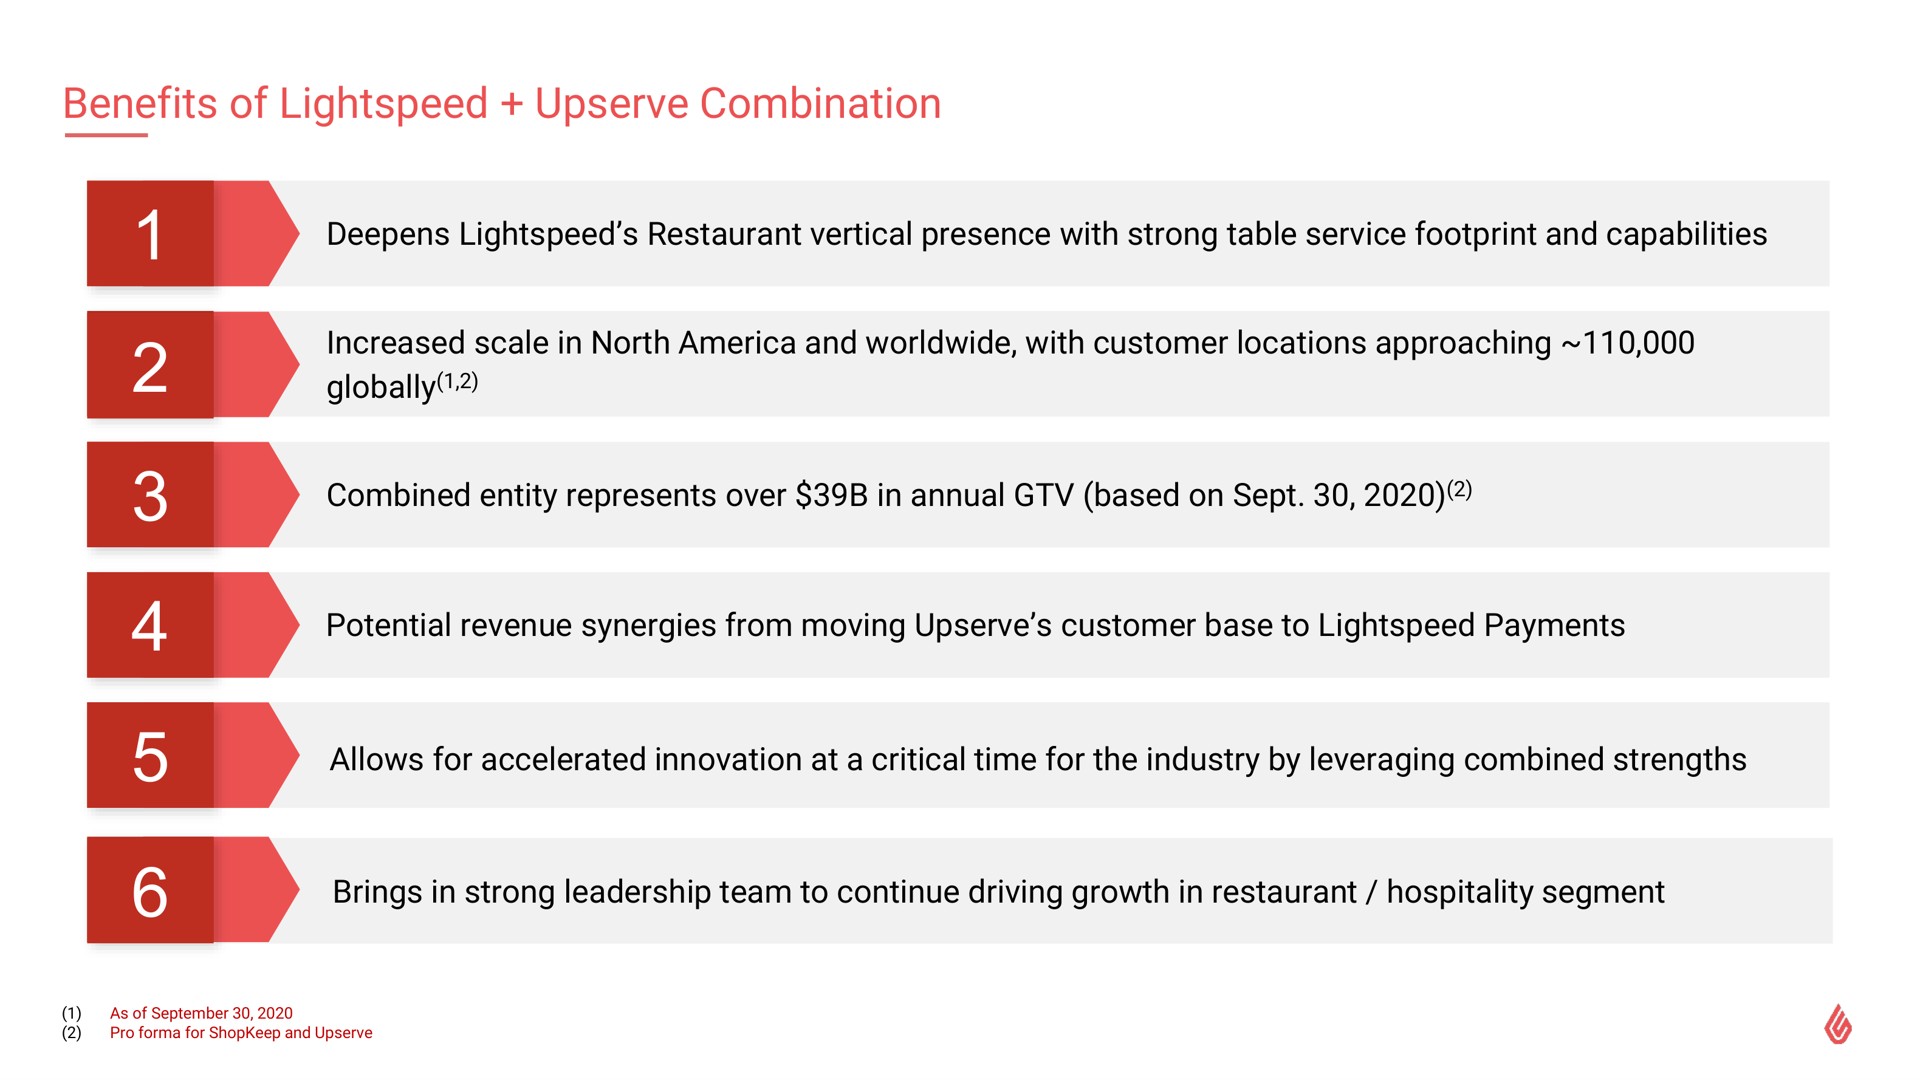 benefits of combination deepens restaurant vertical presence with strong table service footprint and capabilities increased scale in north and with customer locations approaching globally combined entity represents over in annual based on sept potential revenue synergies from moving customer base to payments allows for accelerated innovation at a critical time for the industry by leveraging combined strengths brings in strong leadership team to continue driving growth in restaurant hospitality segment | Lightspeed